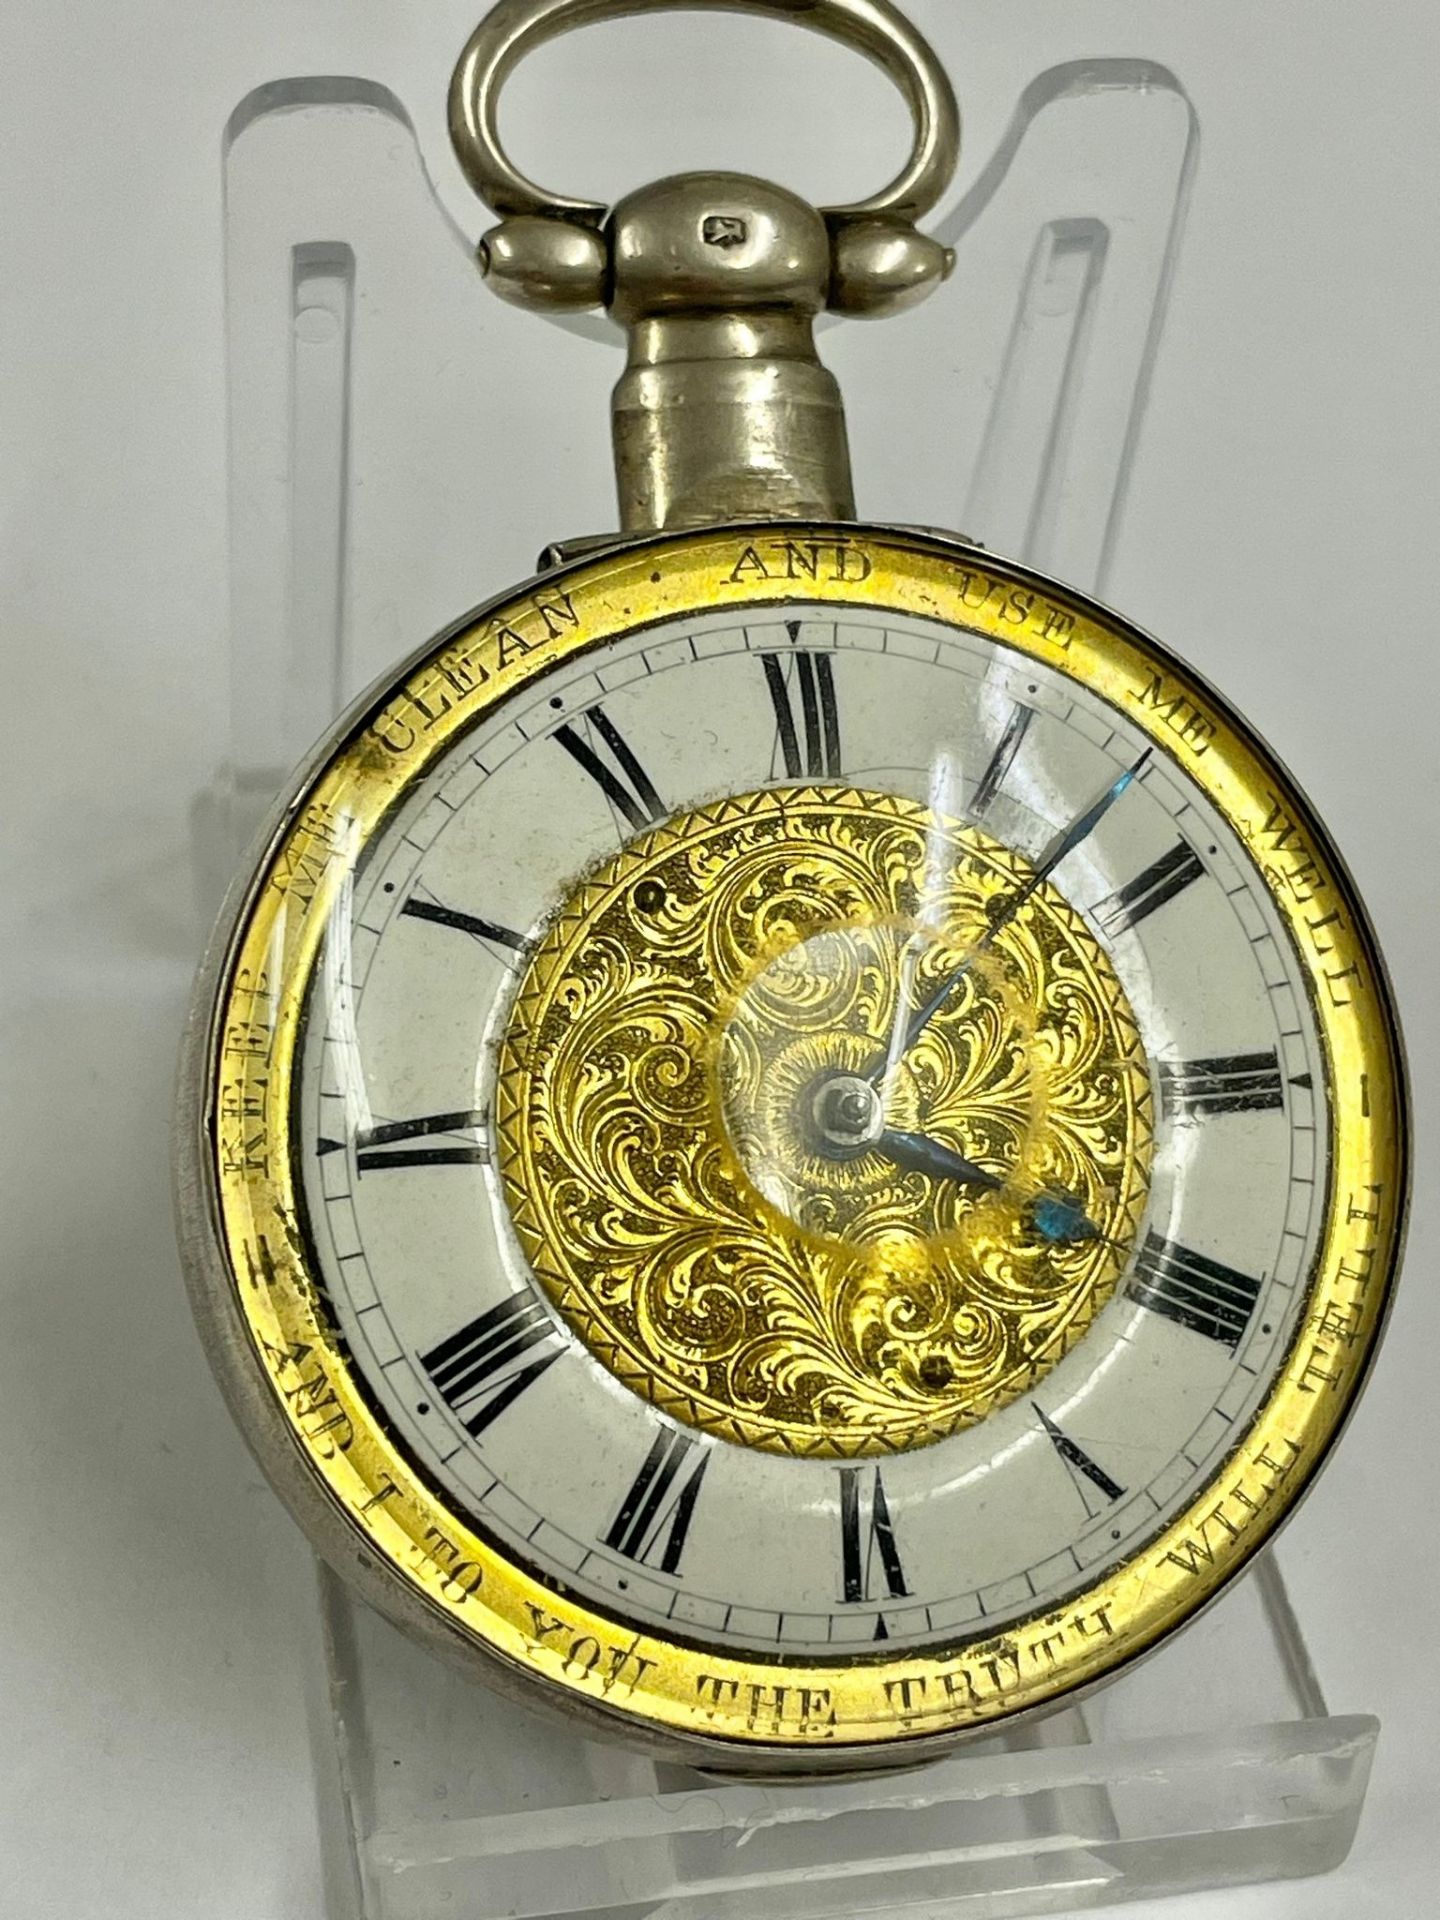 An Antique silver verge fusee pocket watch, as found.